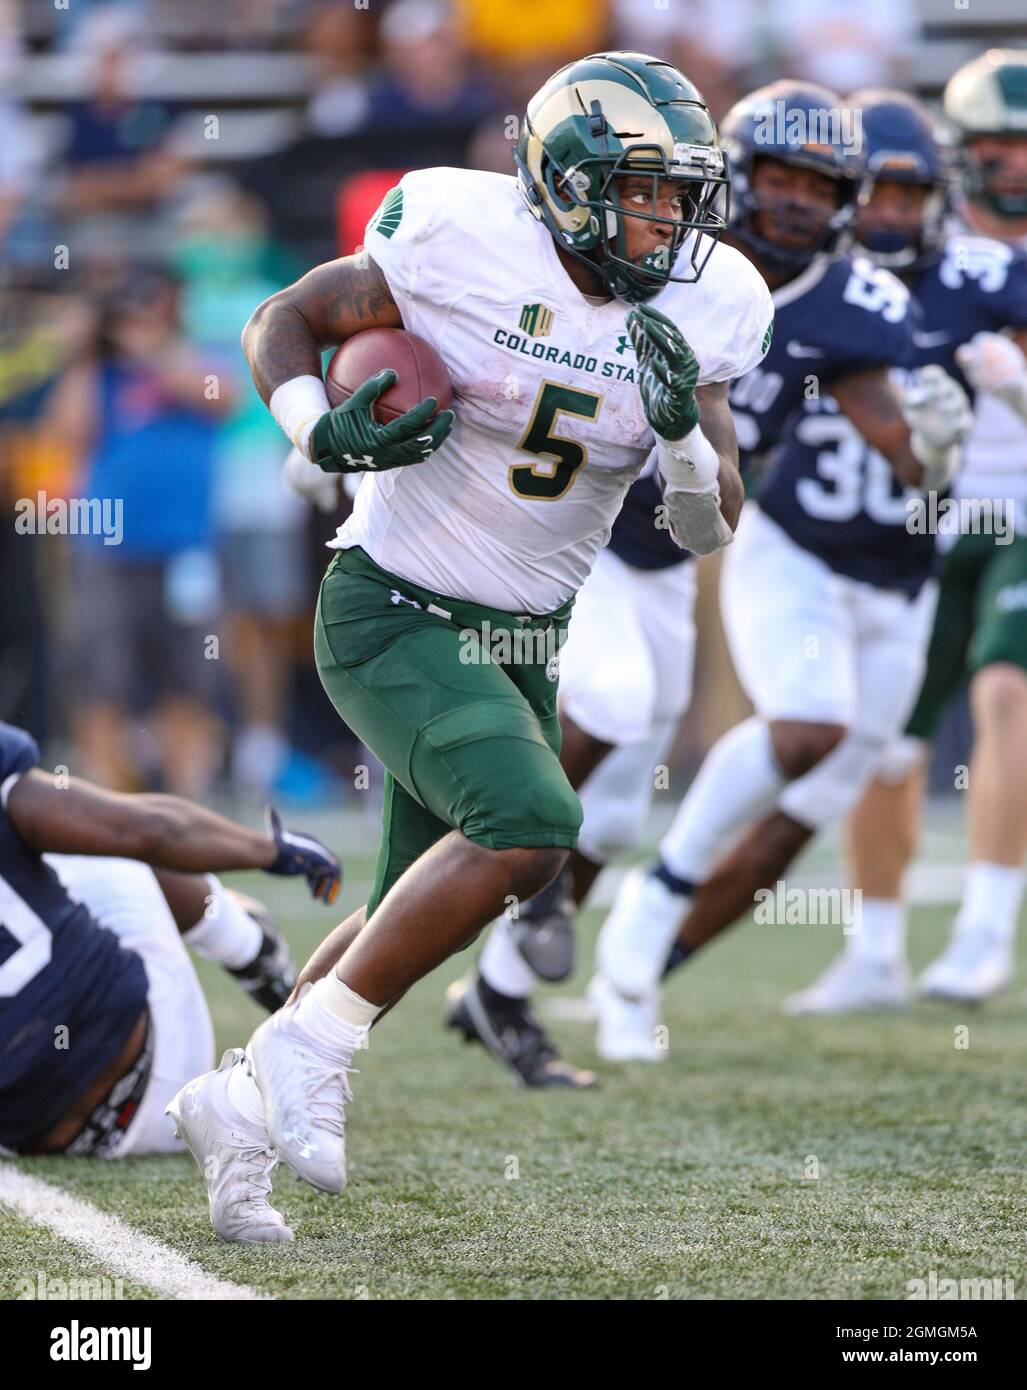 Toledo, OH, USA. 18th Sep, 2021. Colorado State RB David Bailey #5 runs with the ball during the NCAA football game between the Toledo Rockets and the Colorado State rams at the Glass Bowl in Toledo, OH. Kyle Okita/CSM/Alamy Live News Stock Photo